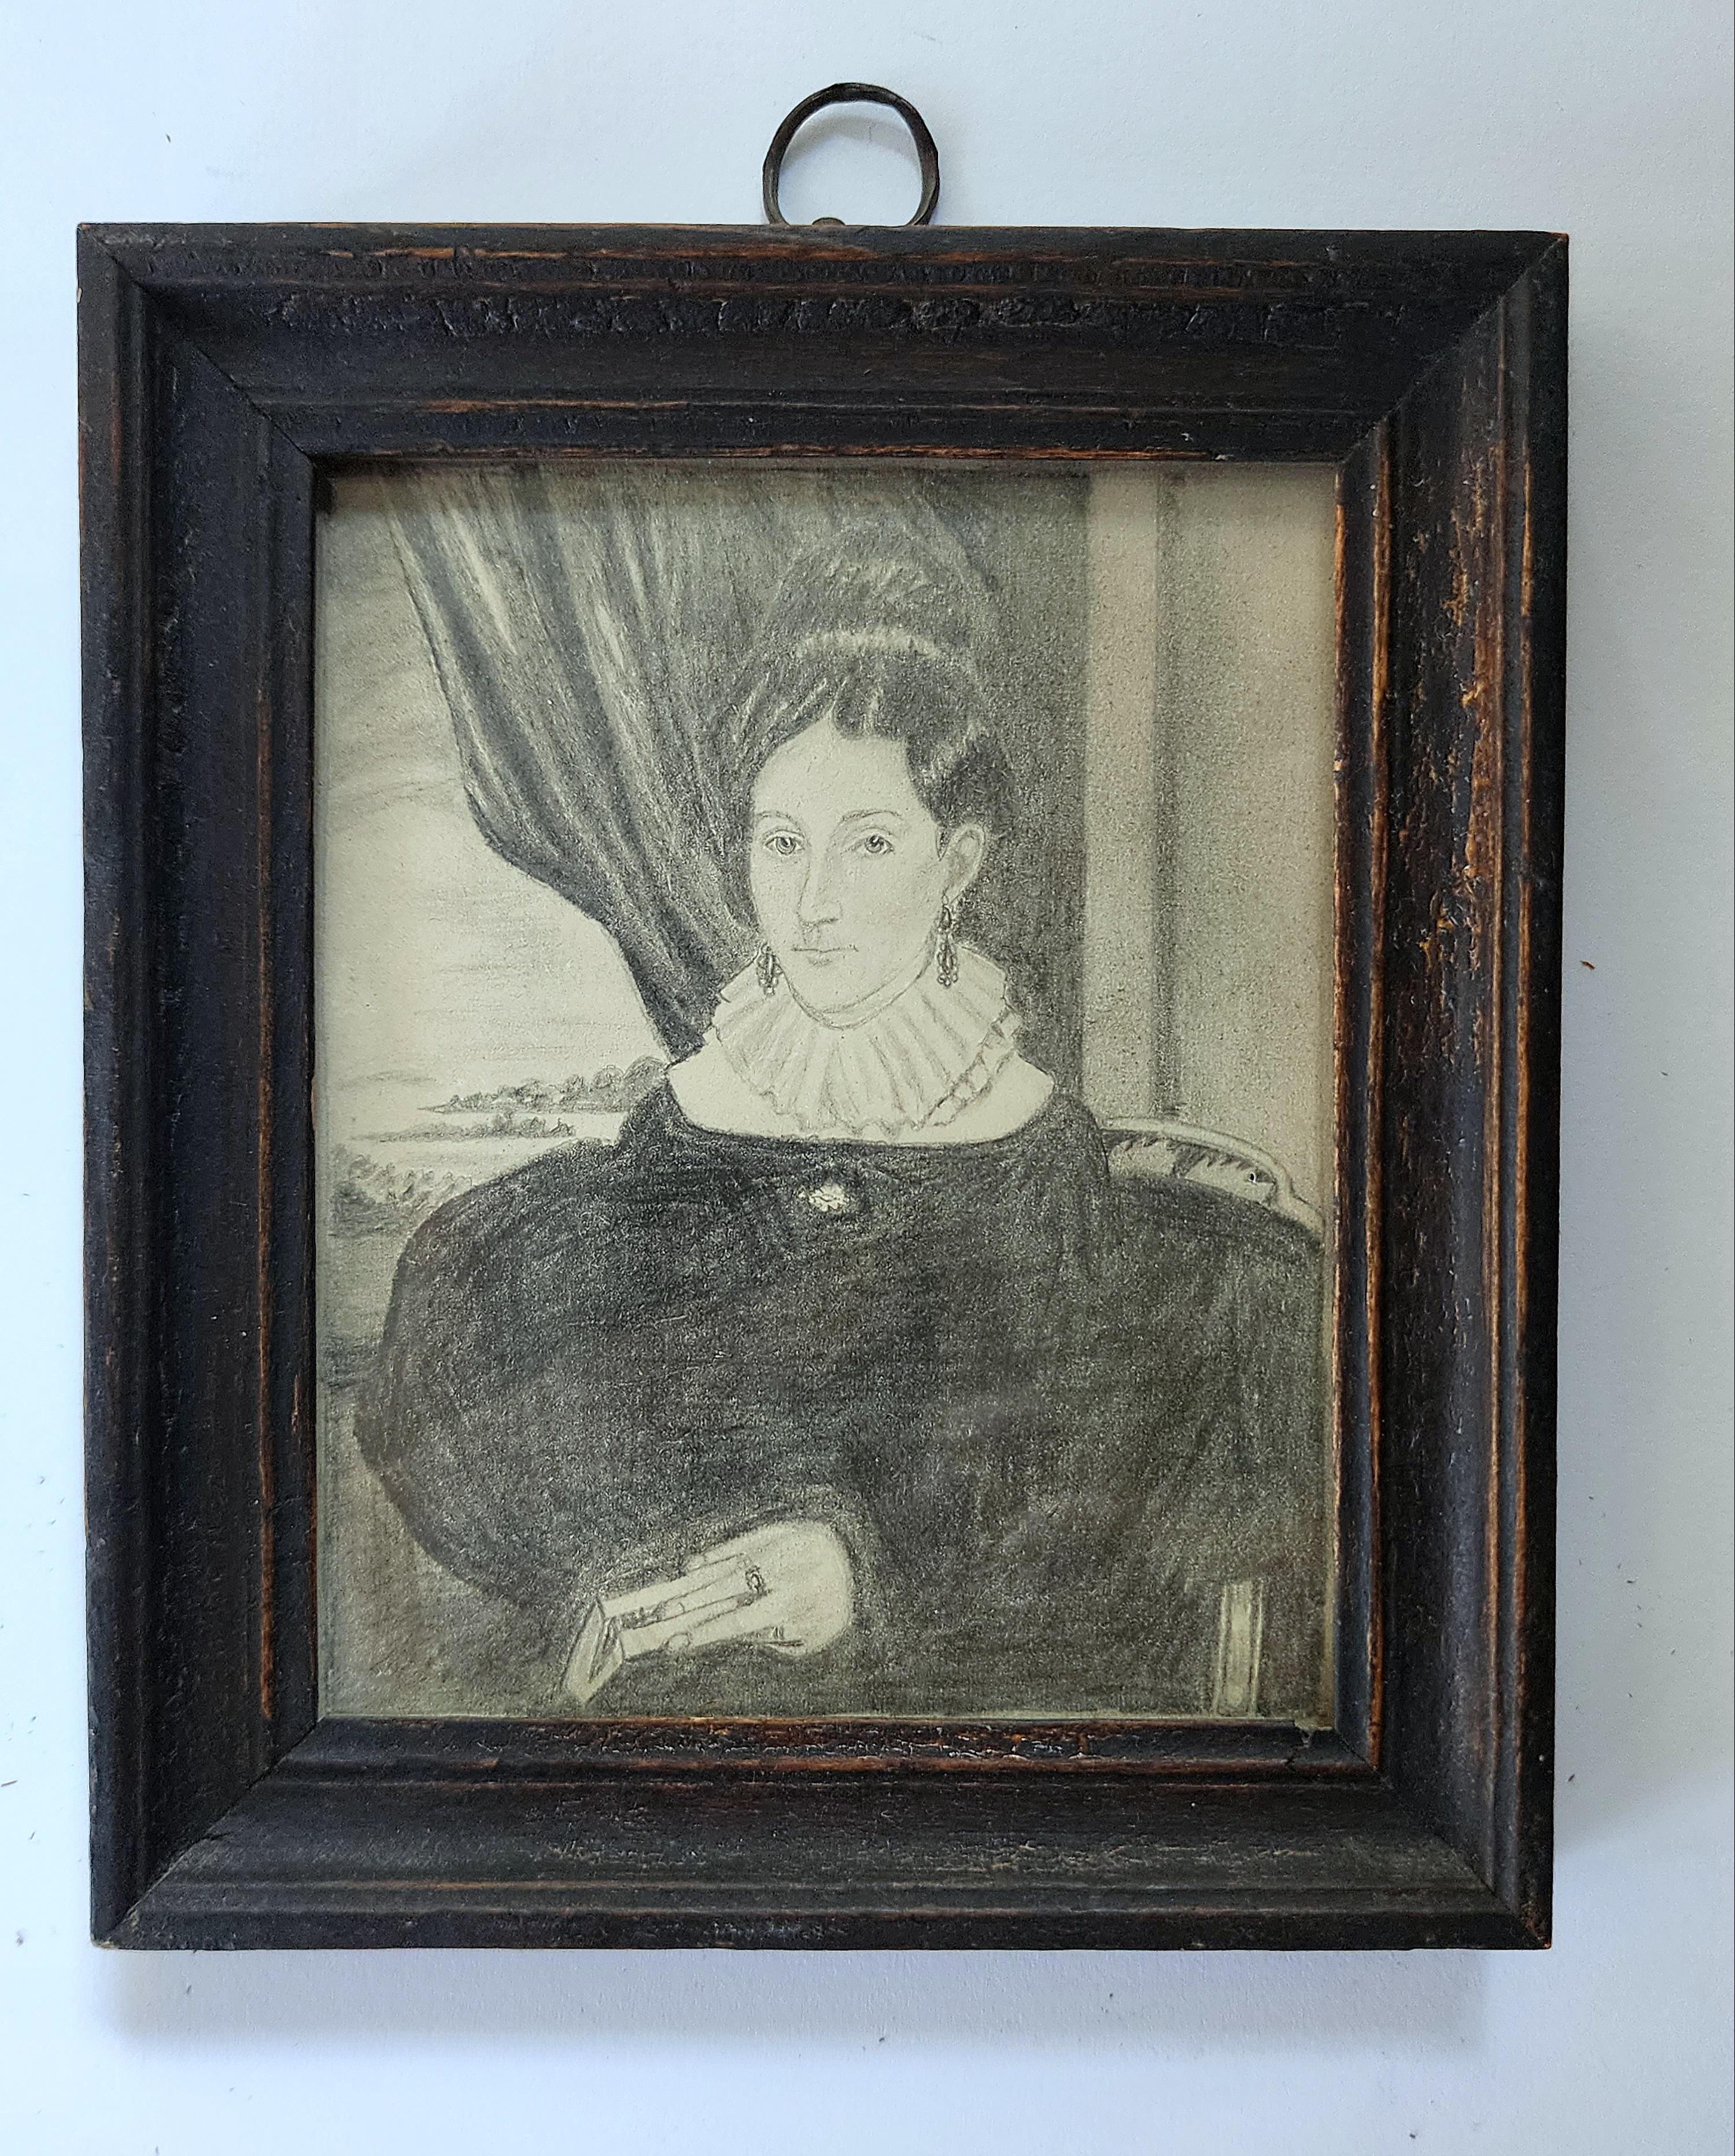 This is a very beautiful , highly detailed and well executed portrait of a woman. Created in the early nineteenth century with graphite on paper. The sitter can be seen with a book in her hand and a ring on her finger. She is sitting in a painted